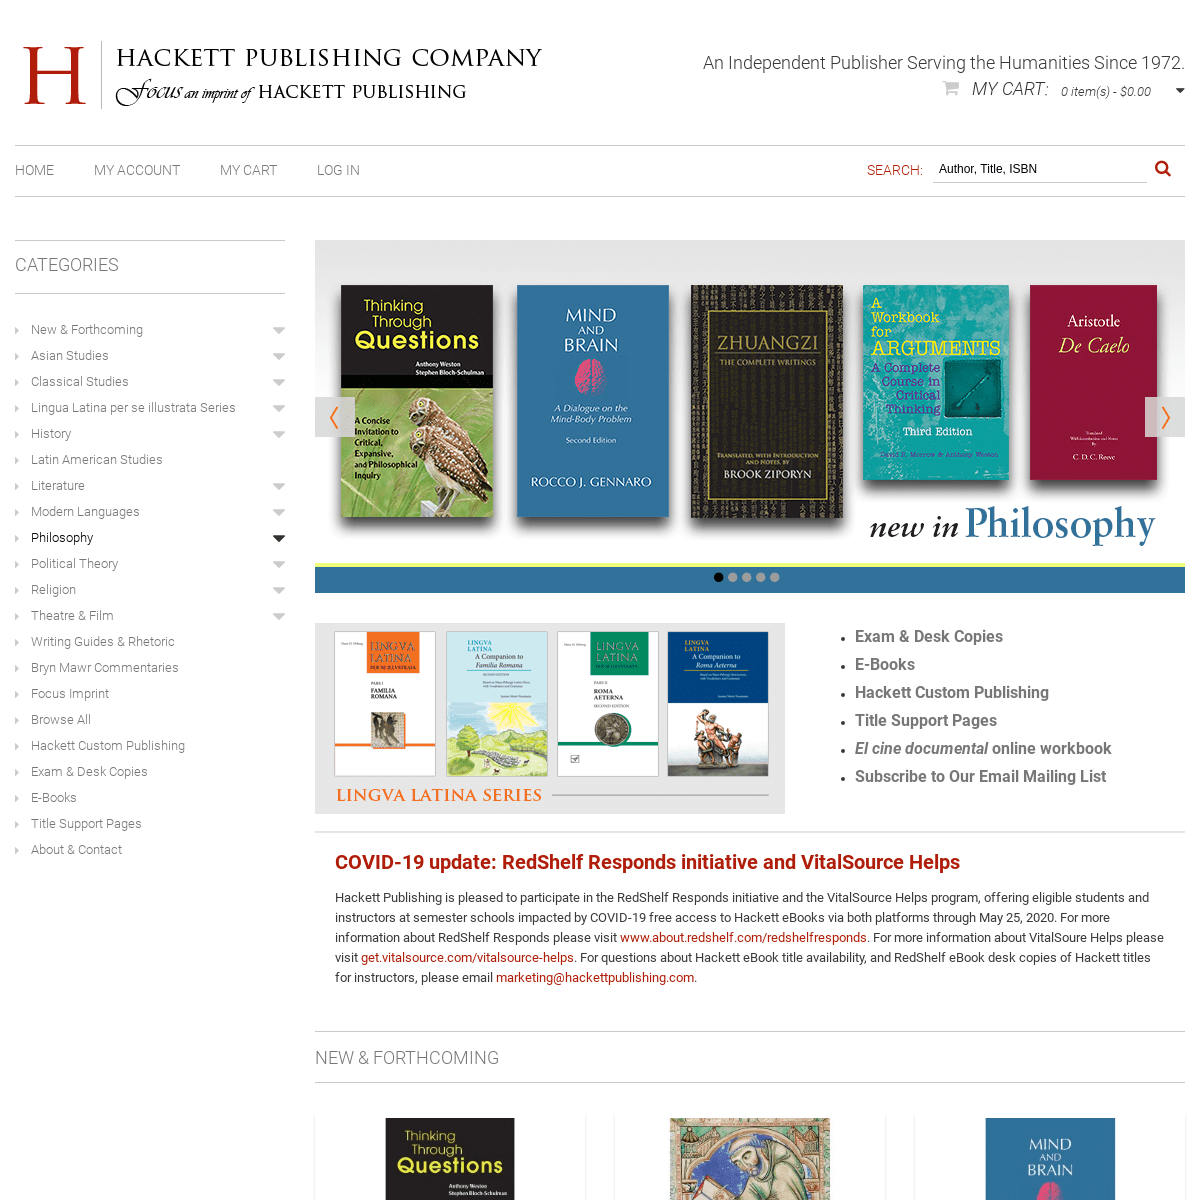 A complete backup of hackettpublishing.com